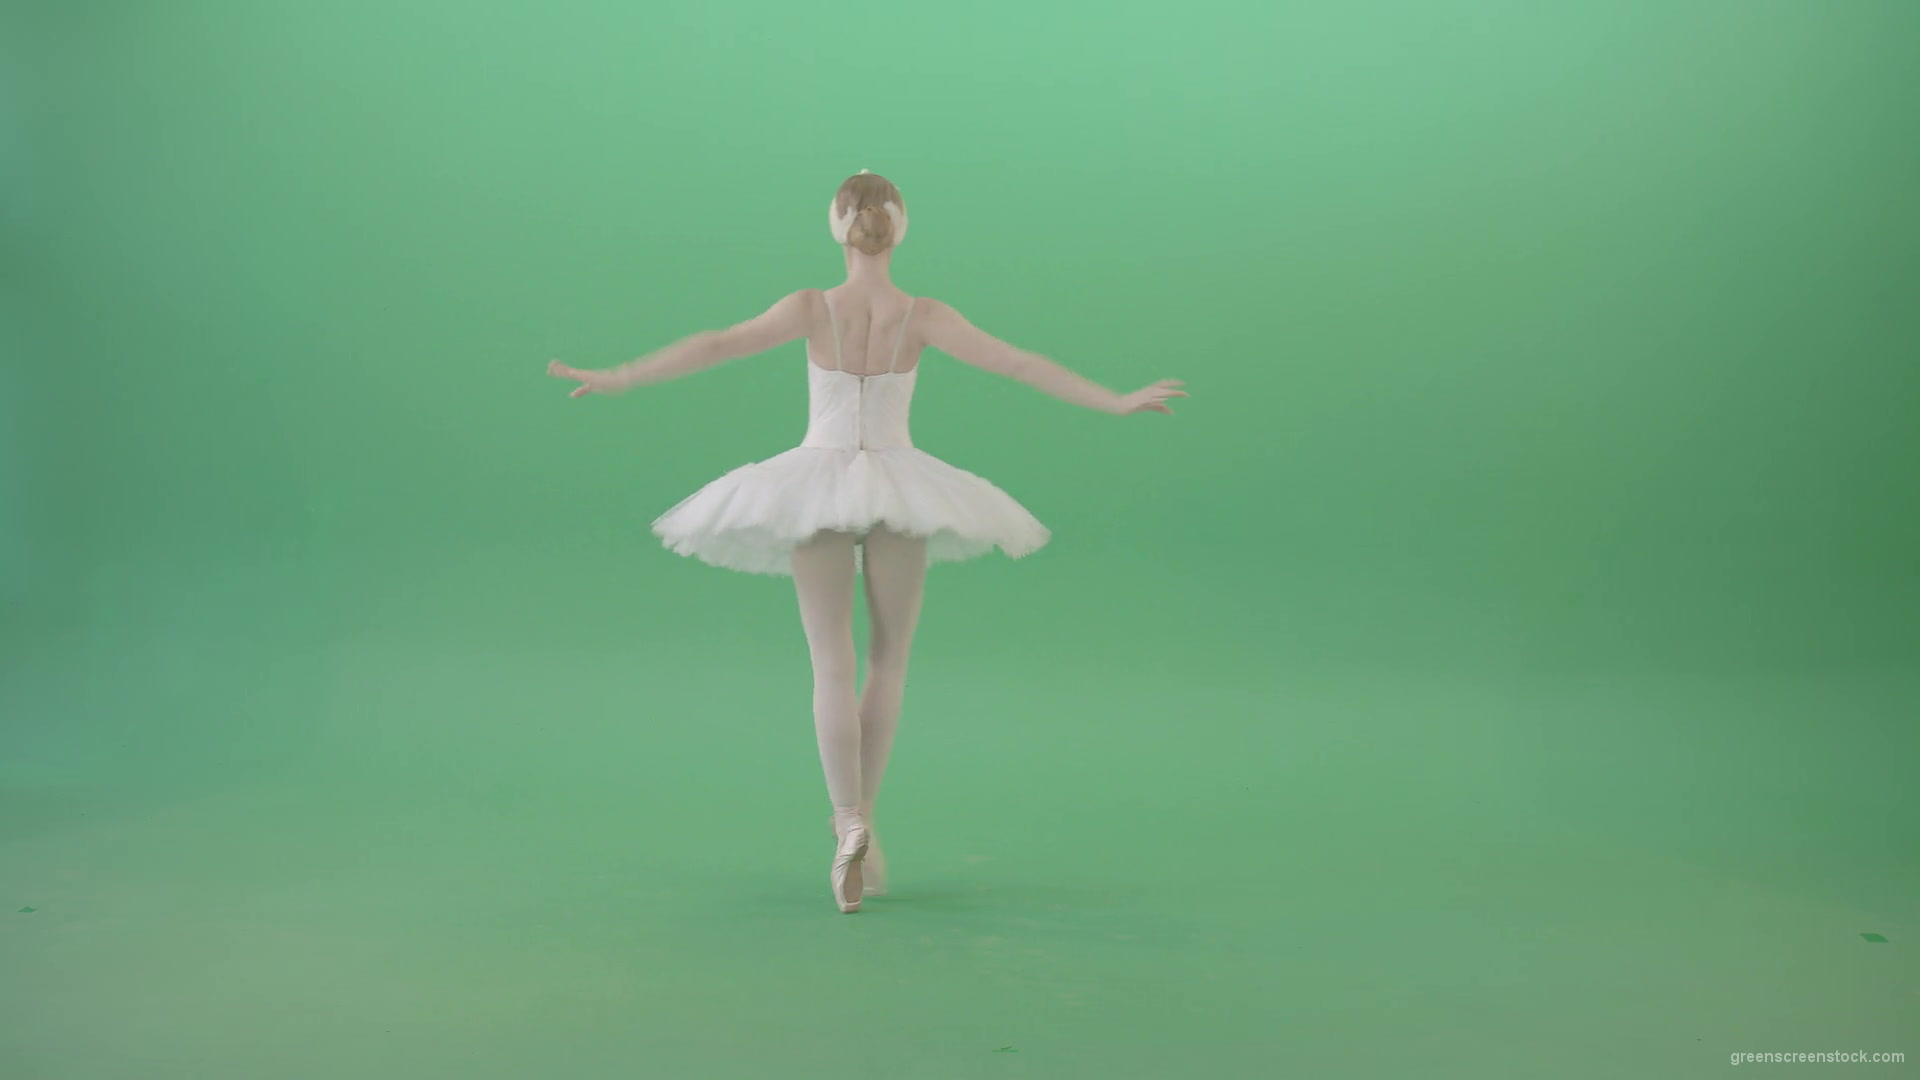 Back-side-view-ballet-dancing-tiny-girl-performs-in-green-screen-studio-4K-Video-Footage-1920_004 Green Screen Stock